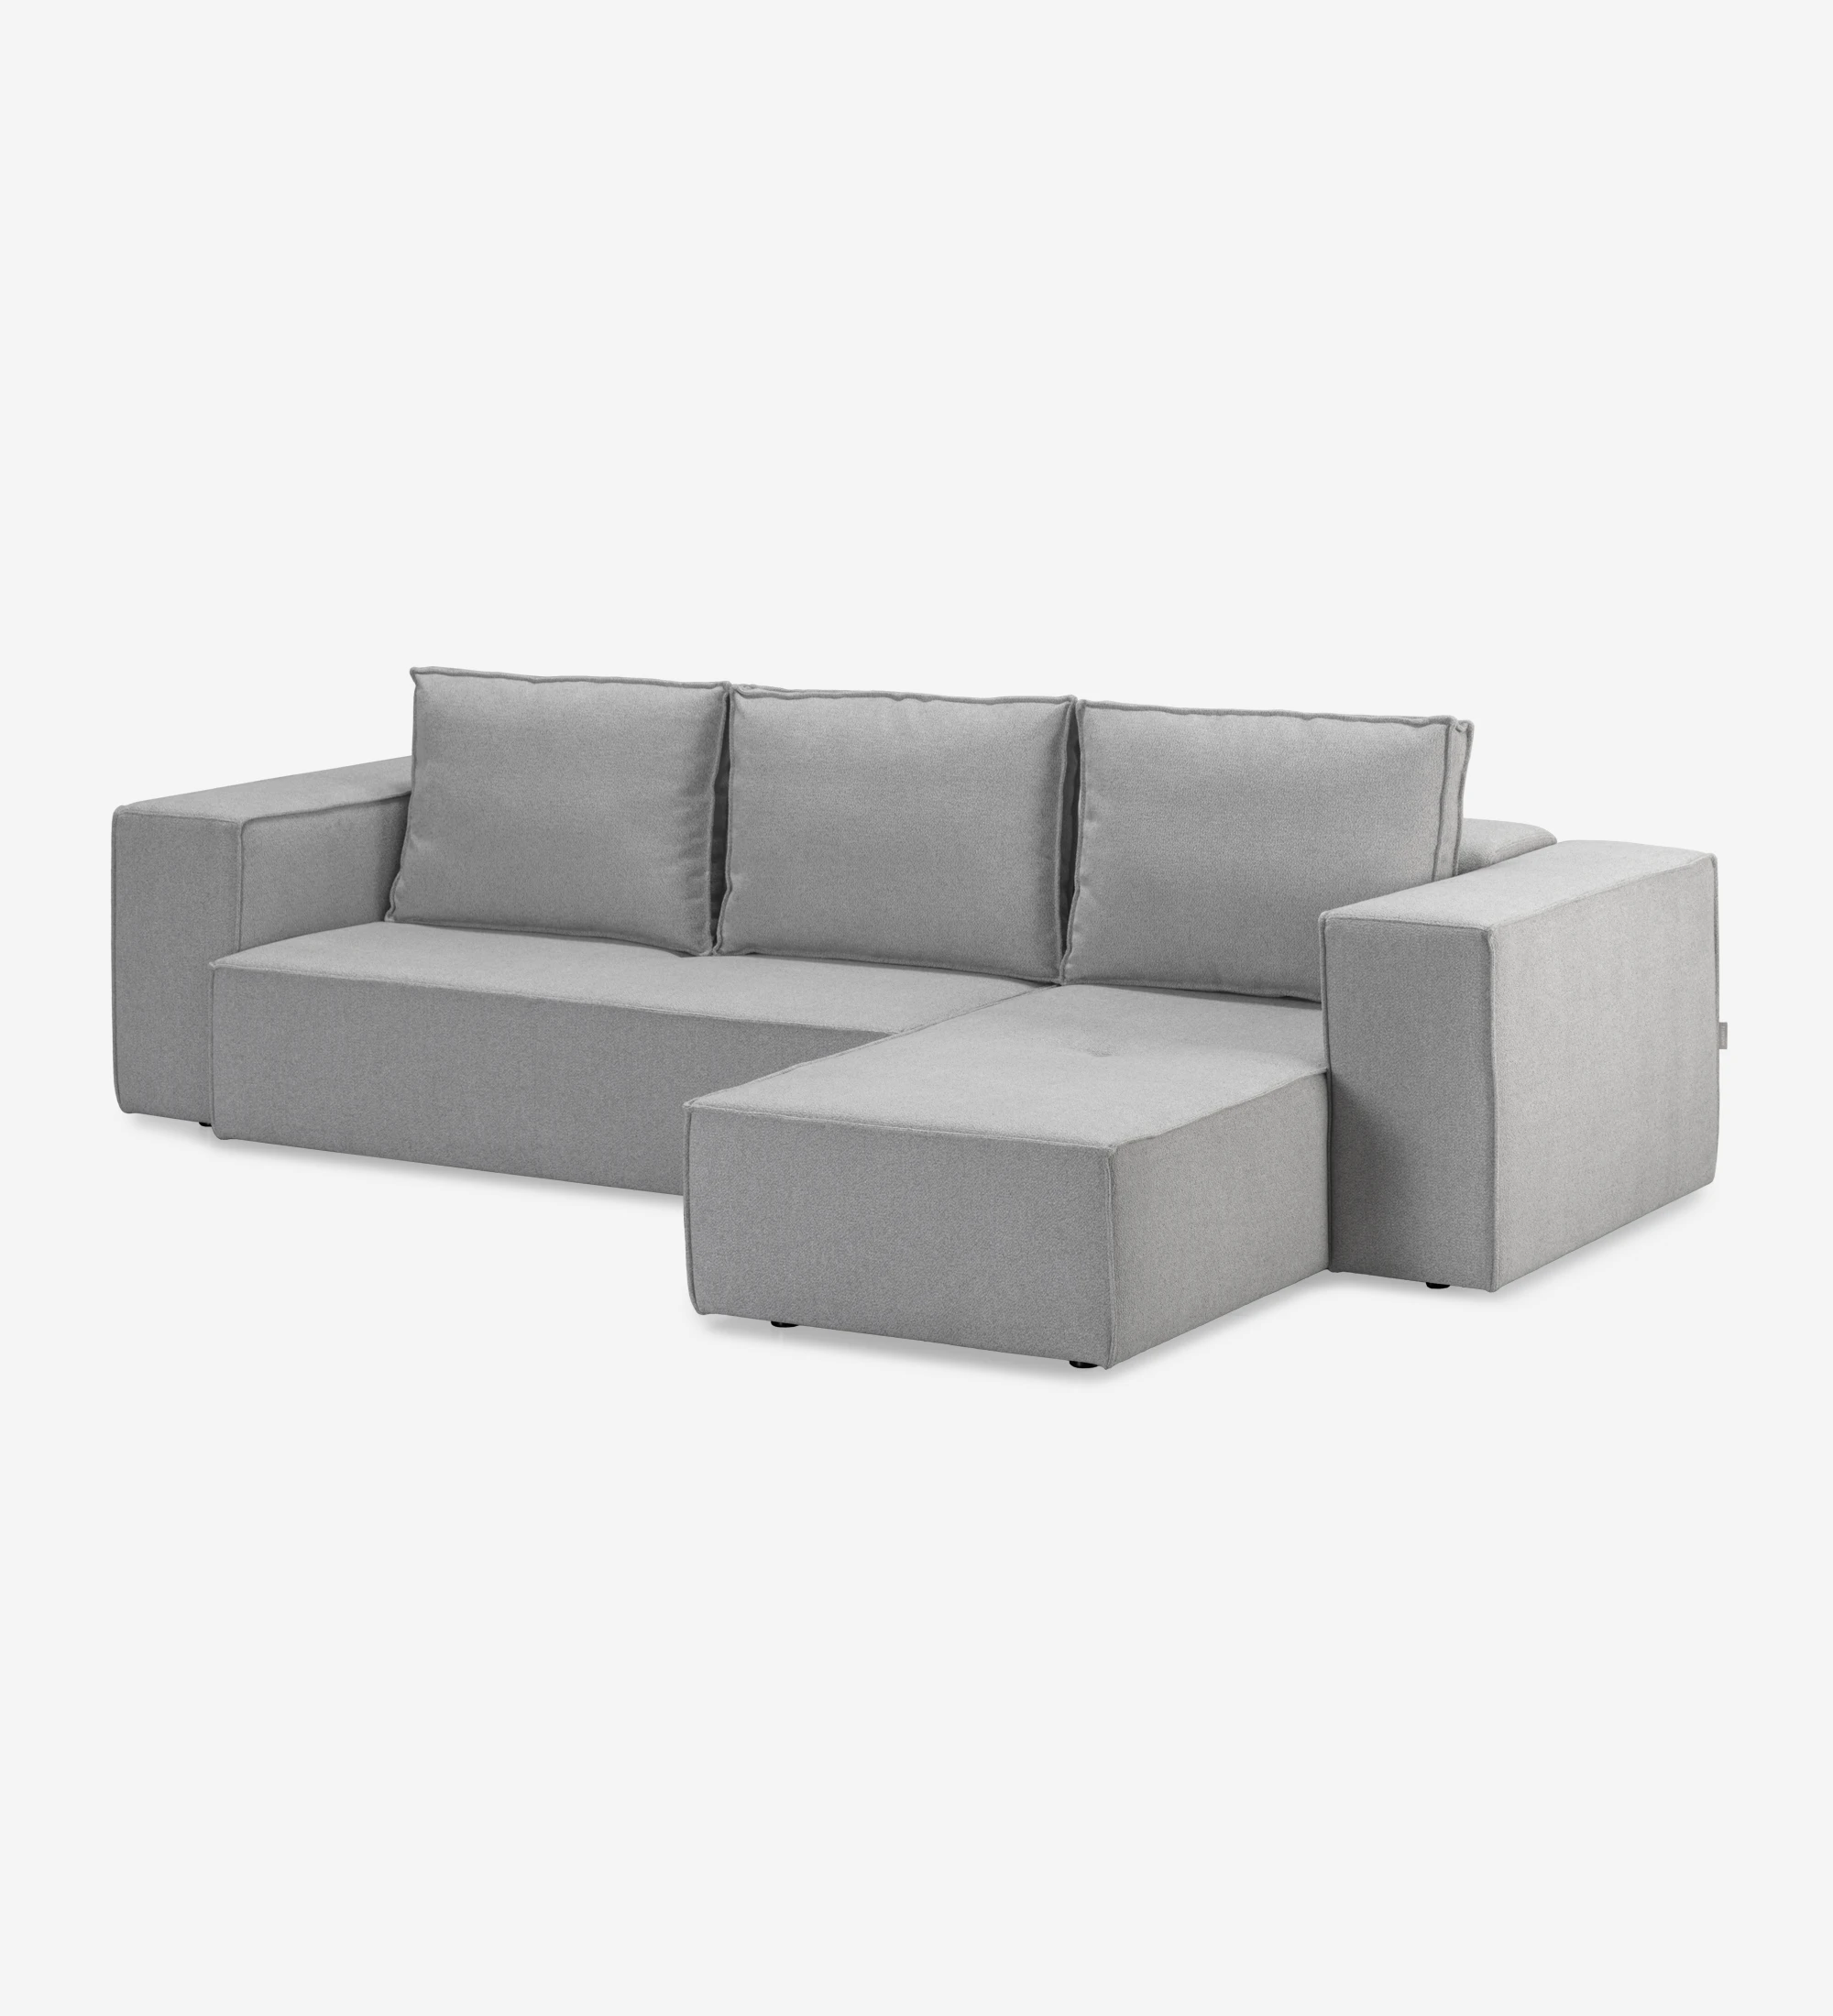 Rio 2-seater sofa and right chaise longue, upholstered in gray fabric, 303 cm.